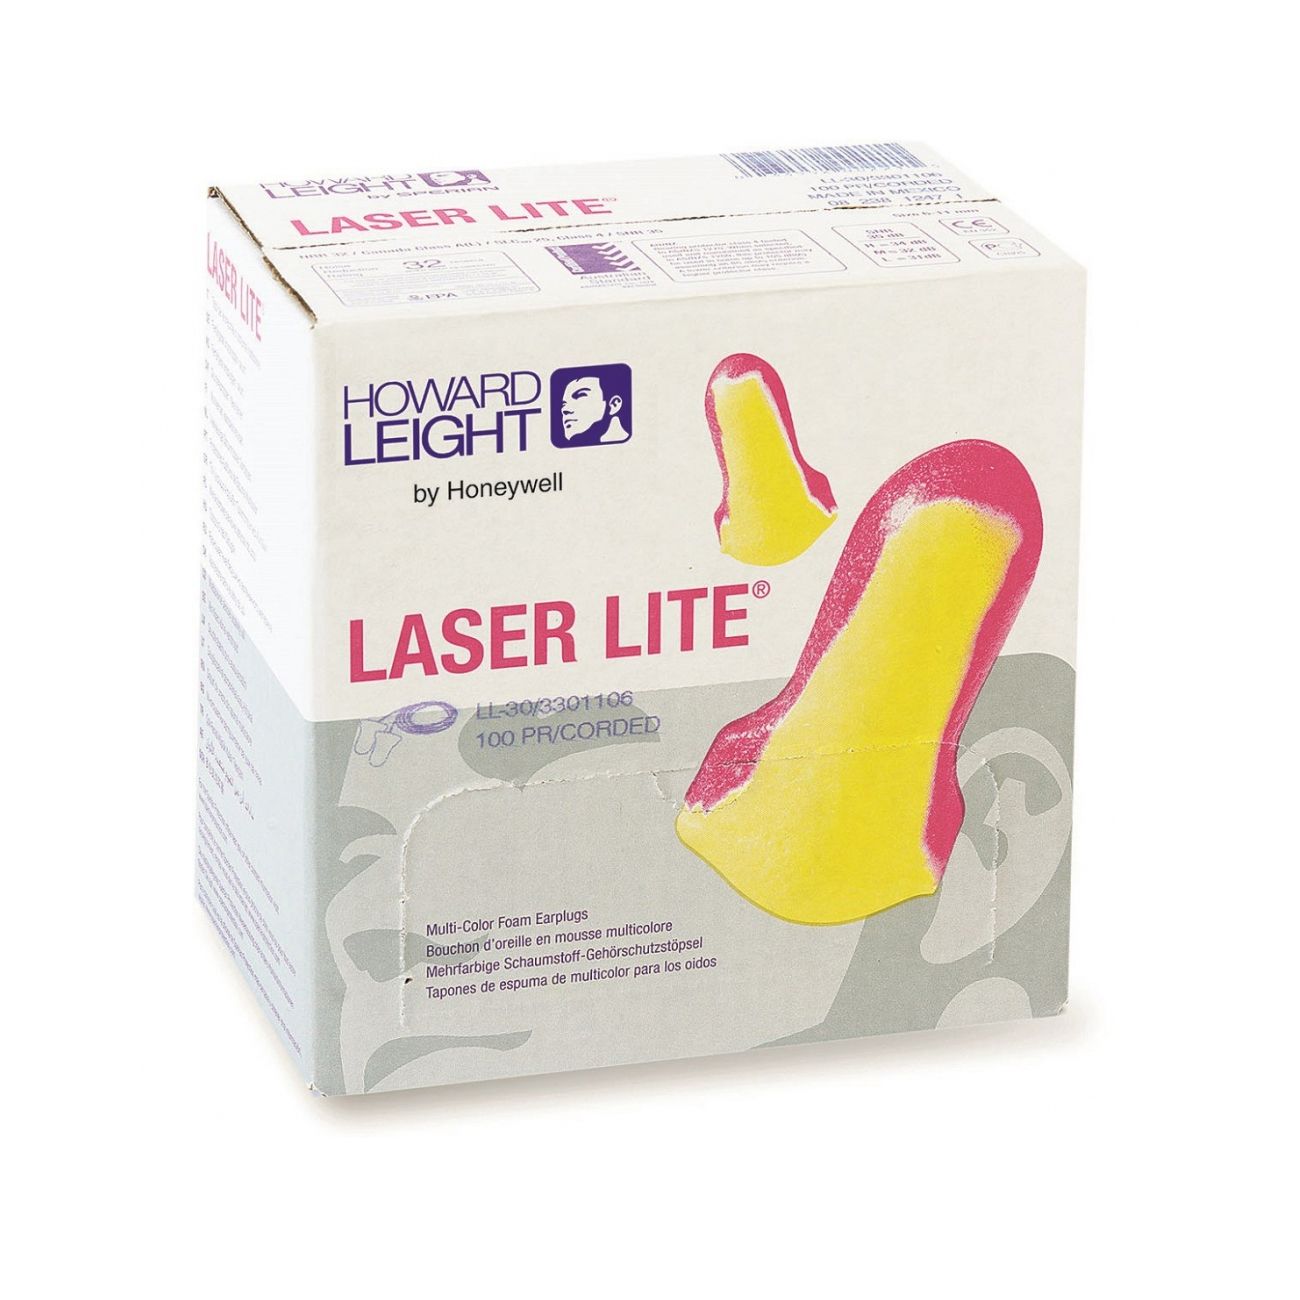 Howard Leight Laser Lite LL-30 Ear Plugs Corded 100 Pair/Box *Free US Shipping* 